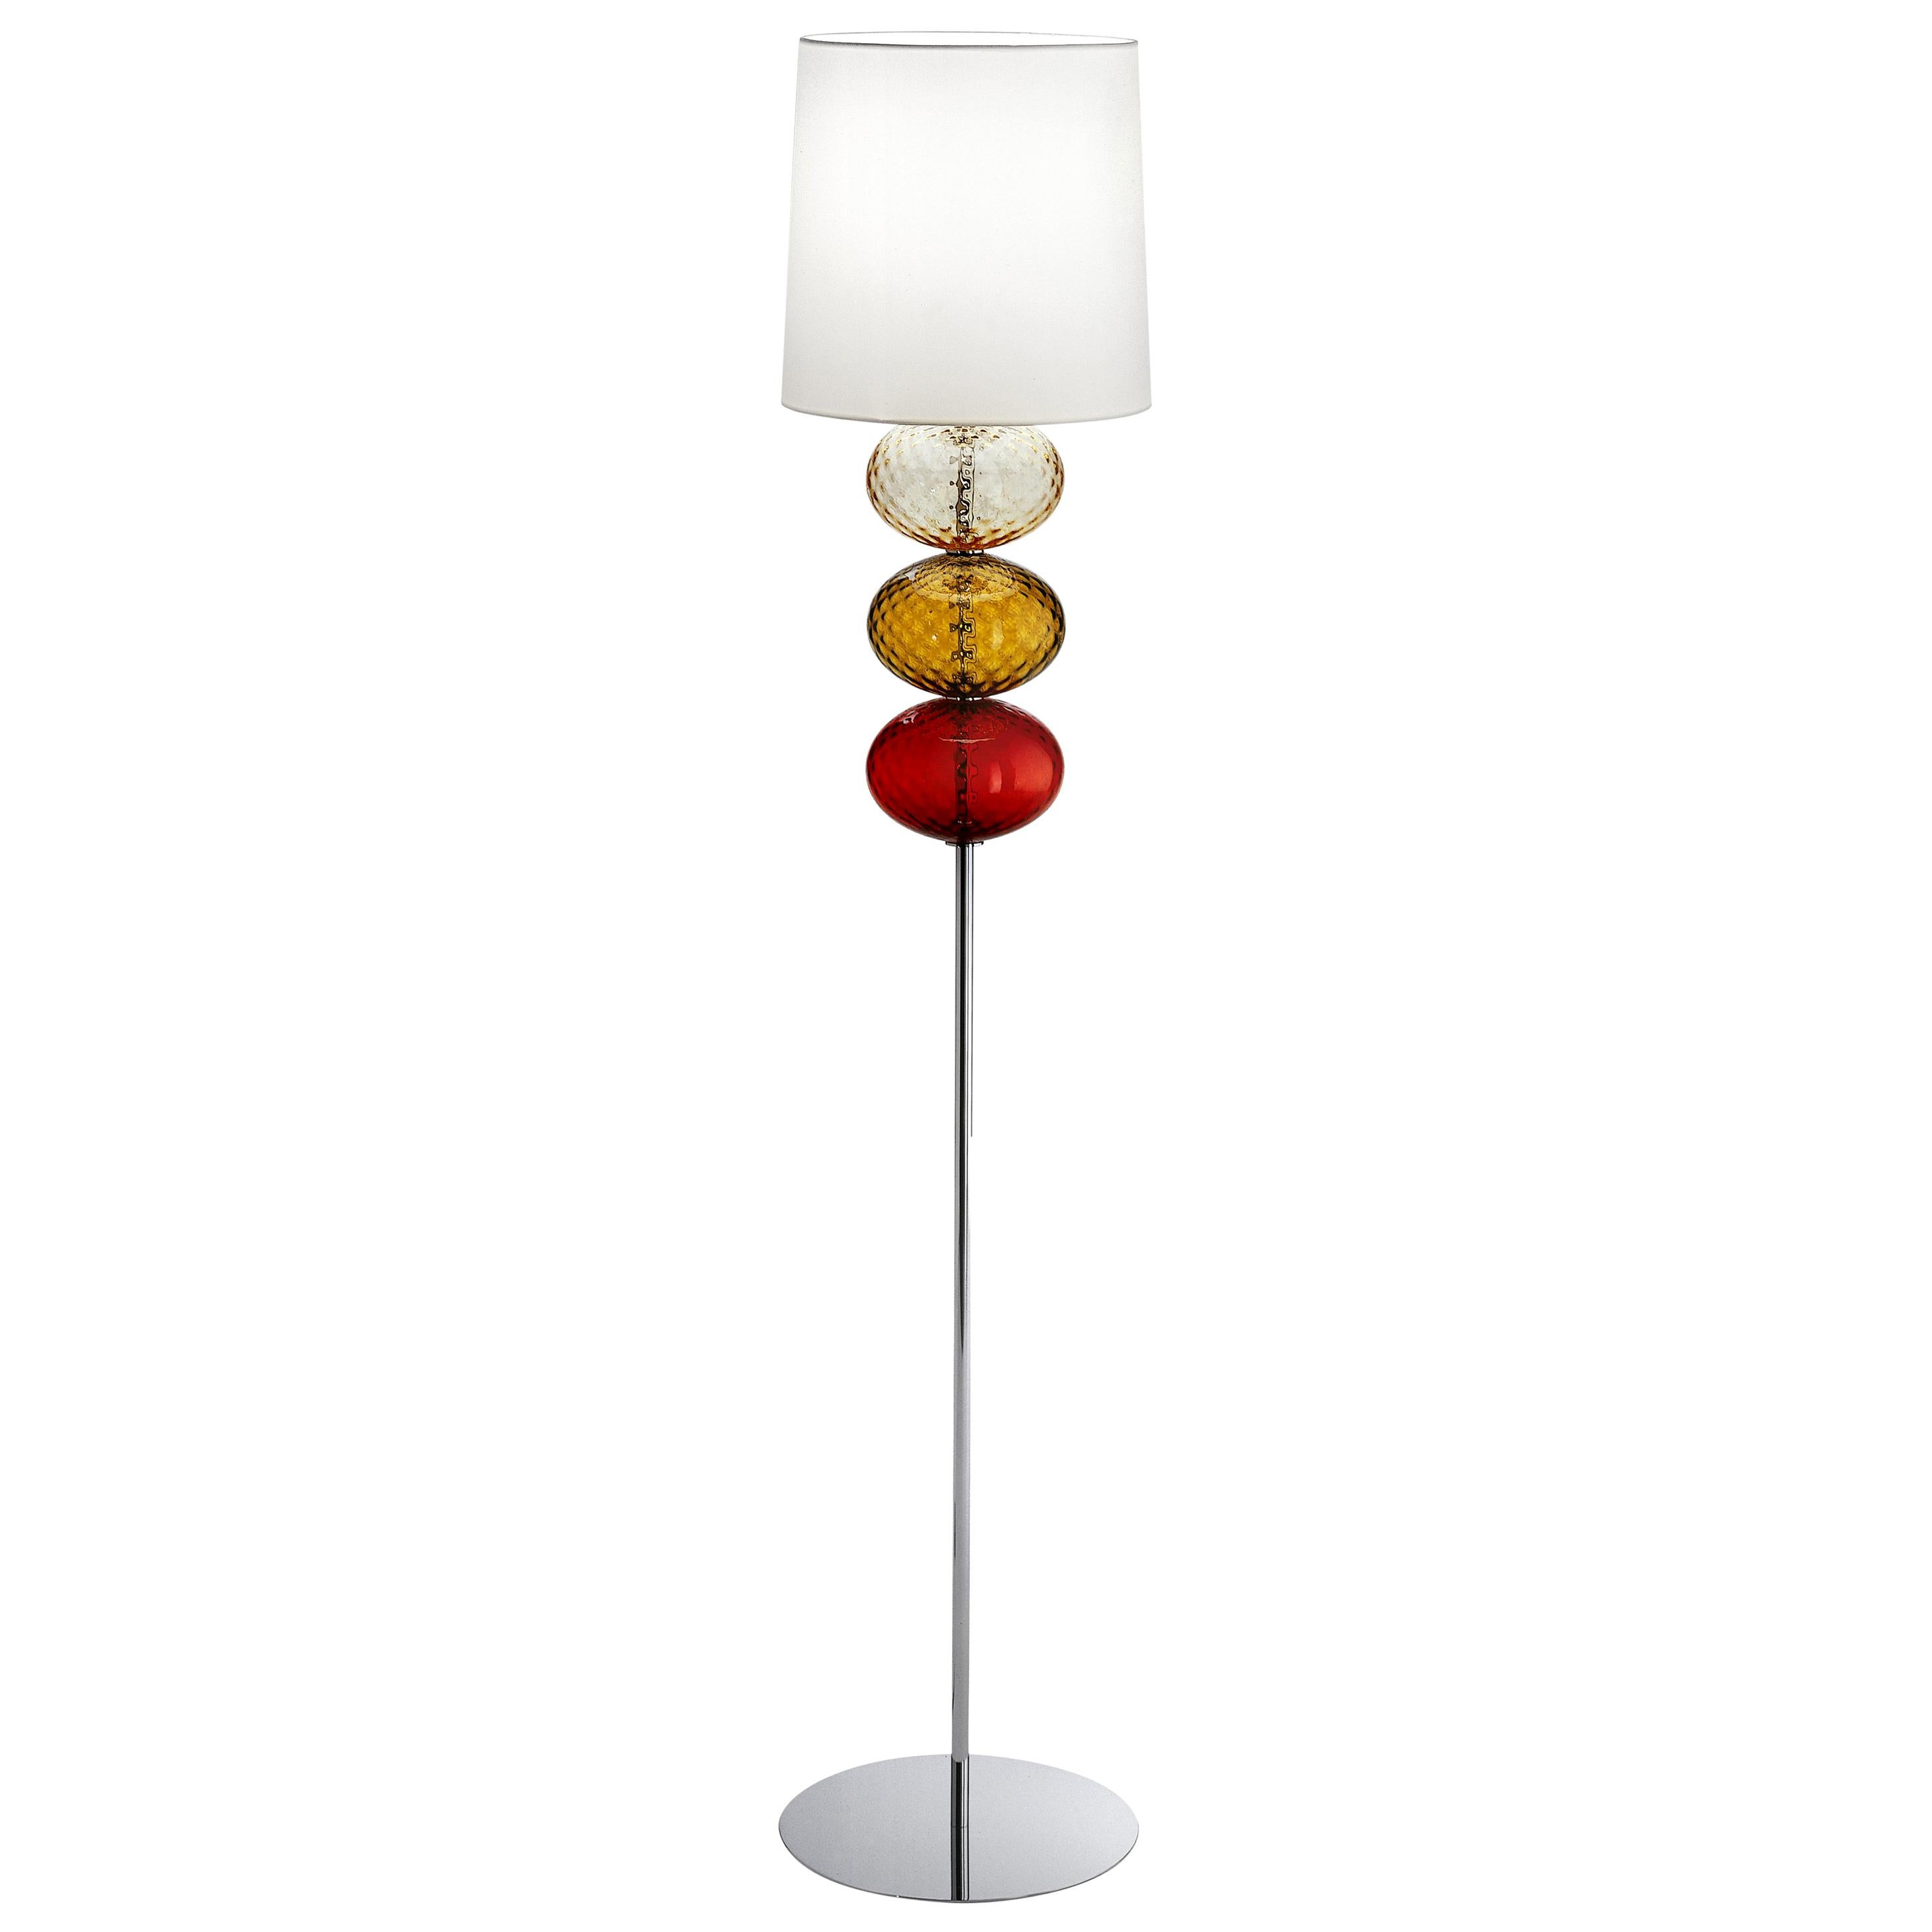 Venini Abat Jour Terra Floor Lamp in Red, Tea, and Amber with White Shade For Sale